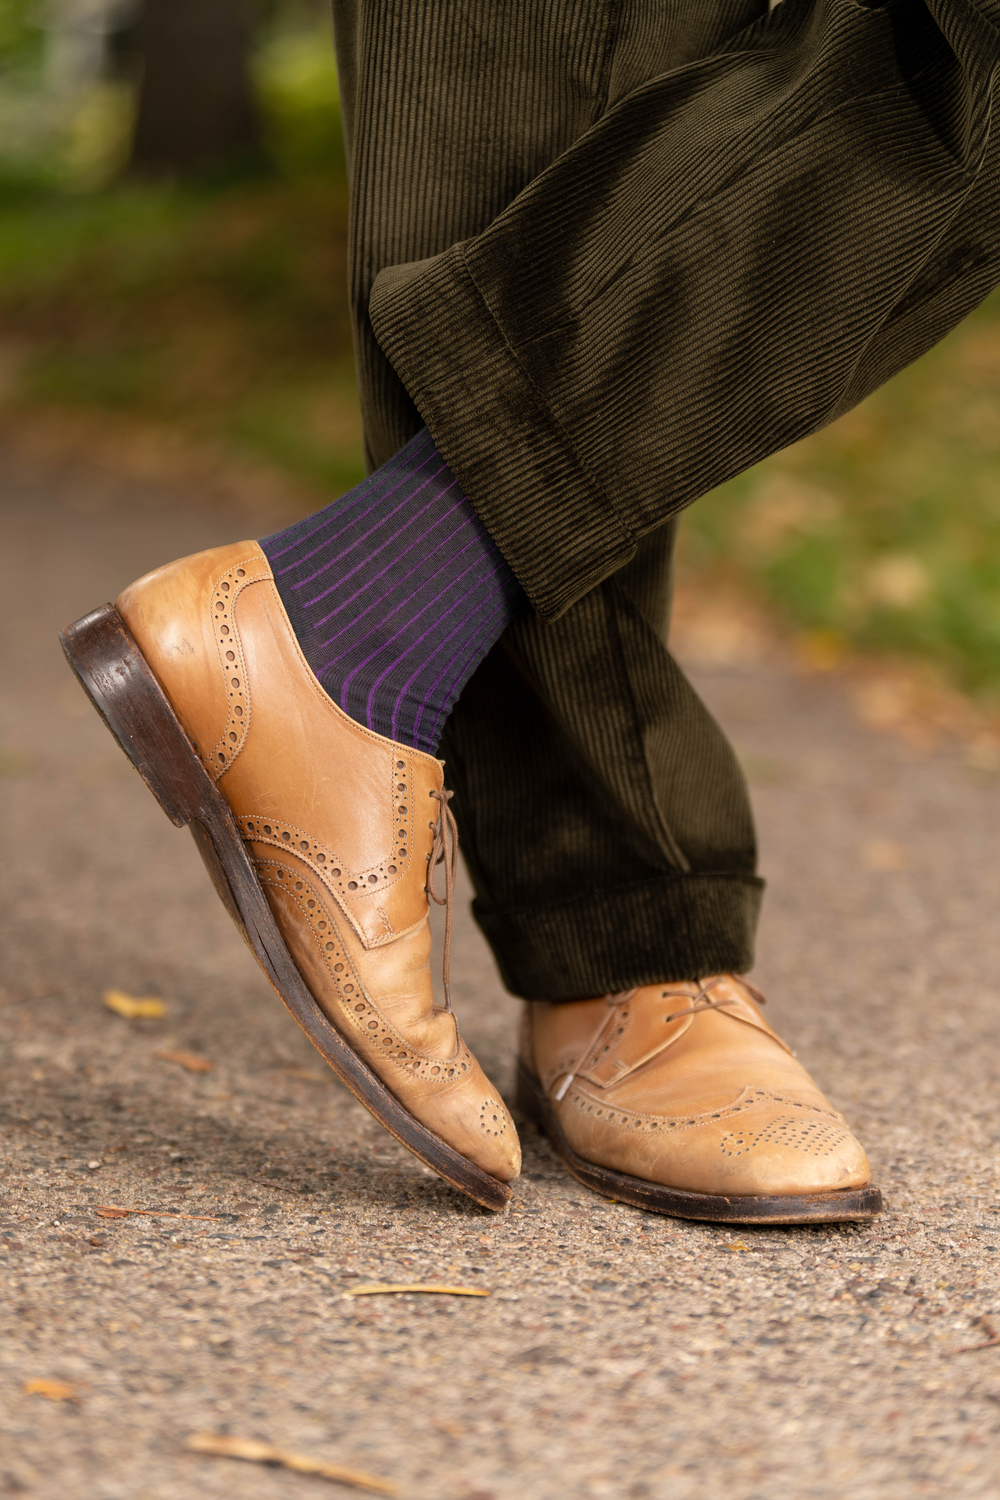 Dark Olive Corduroy trousers with cuffs paired with Cognac tan brogue oxfords  and Dark Green and Purple Shadow Stripe Ribbed Socks.